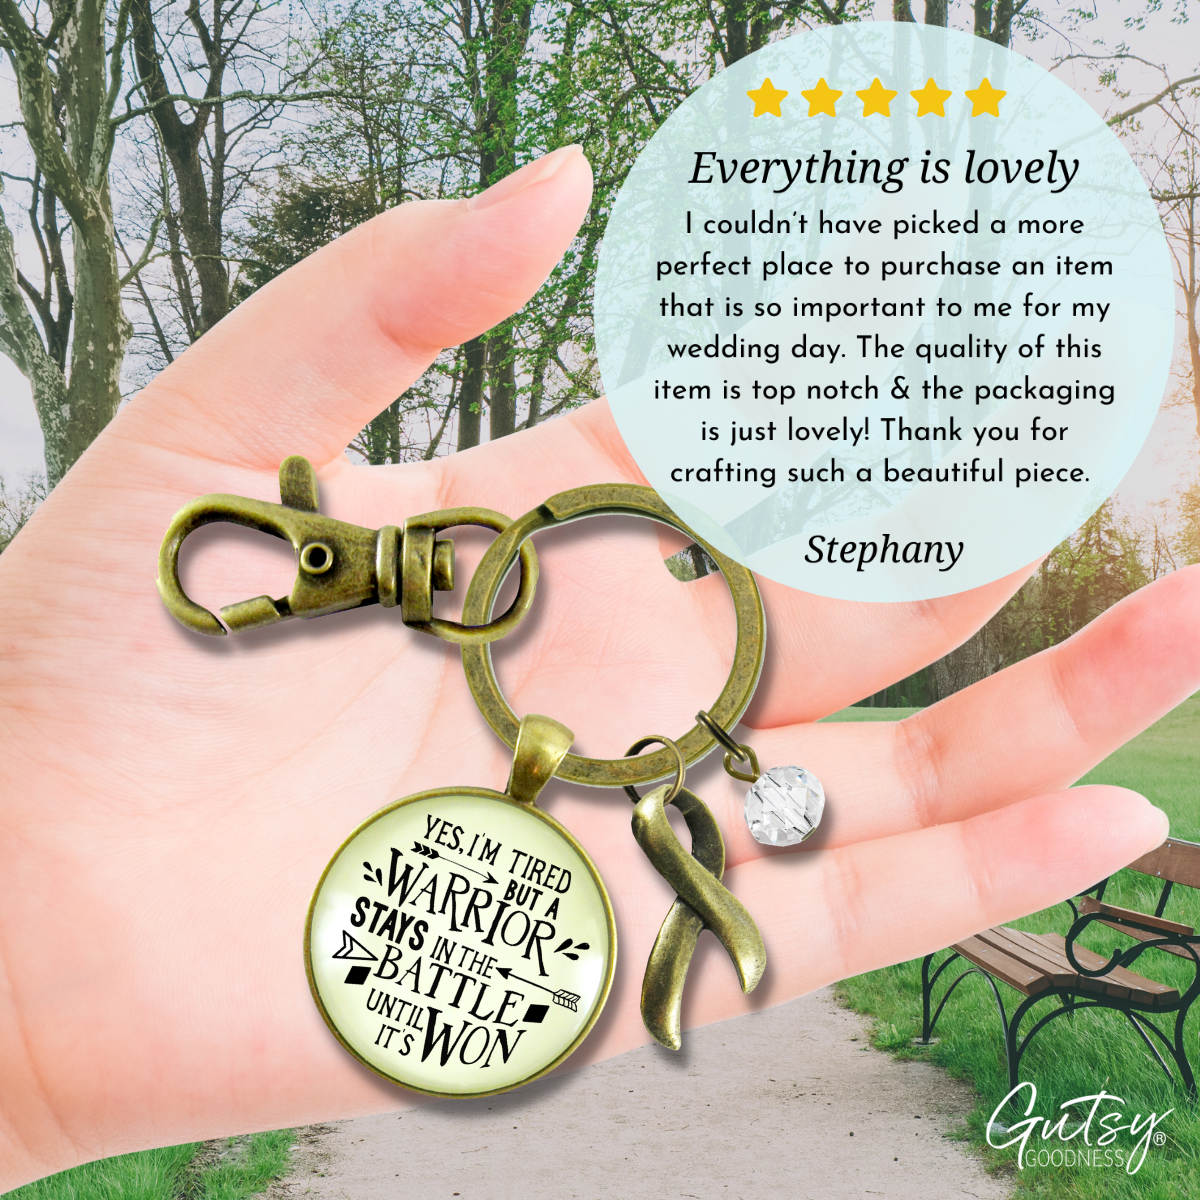 Survivor Keychain Yes I Am Tired Warrior Strong women Bold Life Message Jewelry Ribbon - Gutsy Goodness Handmade Jewelry;Survivor Keychain Yes I Am Tired Warrior Strong Women Bold Life Message Jewelry Ribbon - Gutsy Goodness Handmade Jewelry Gifts